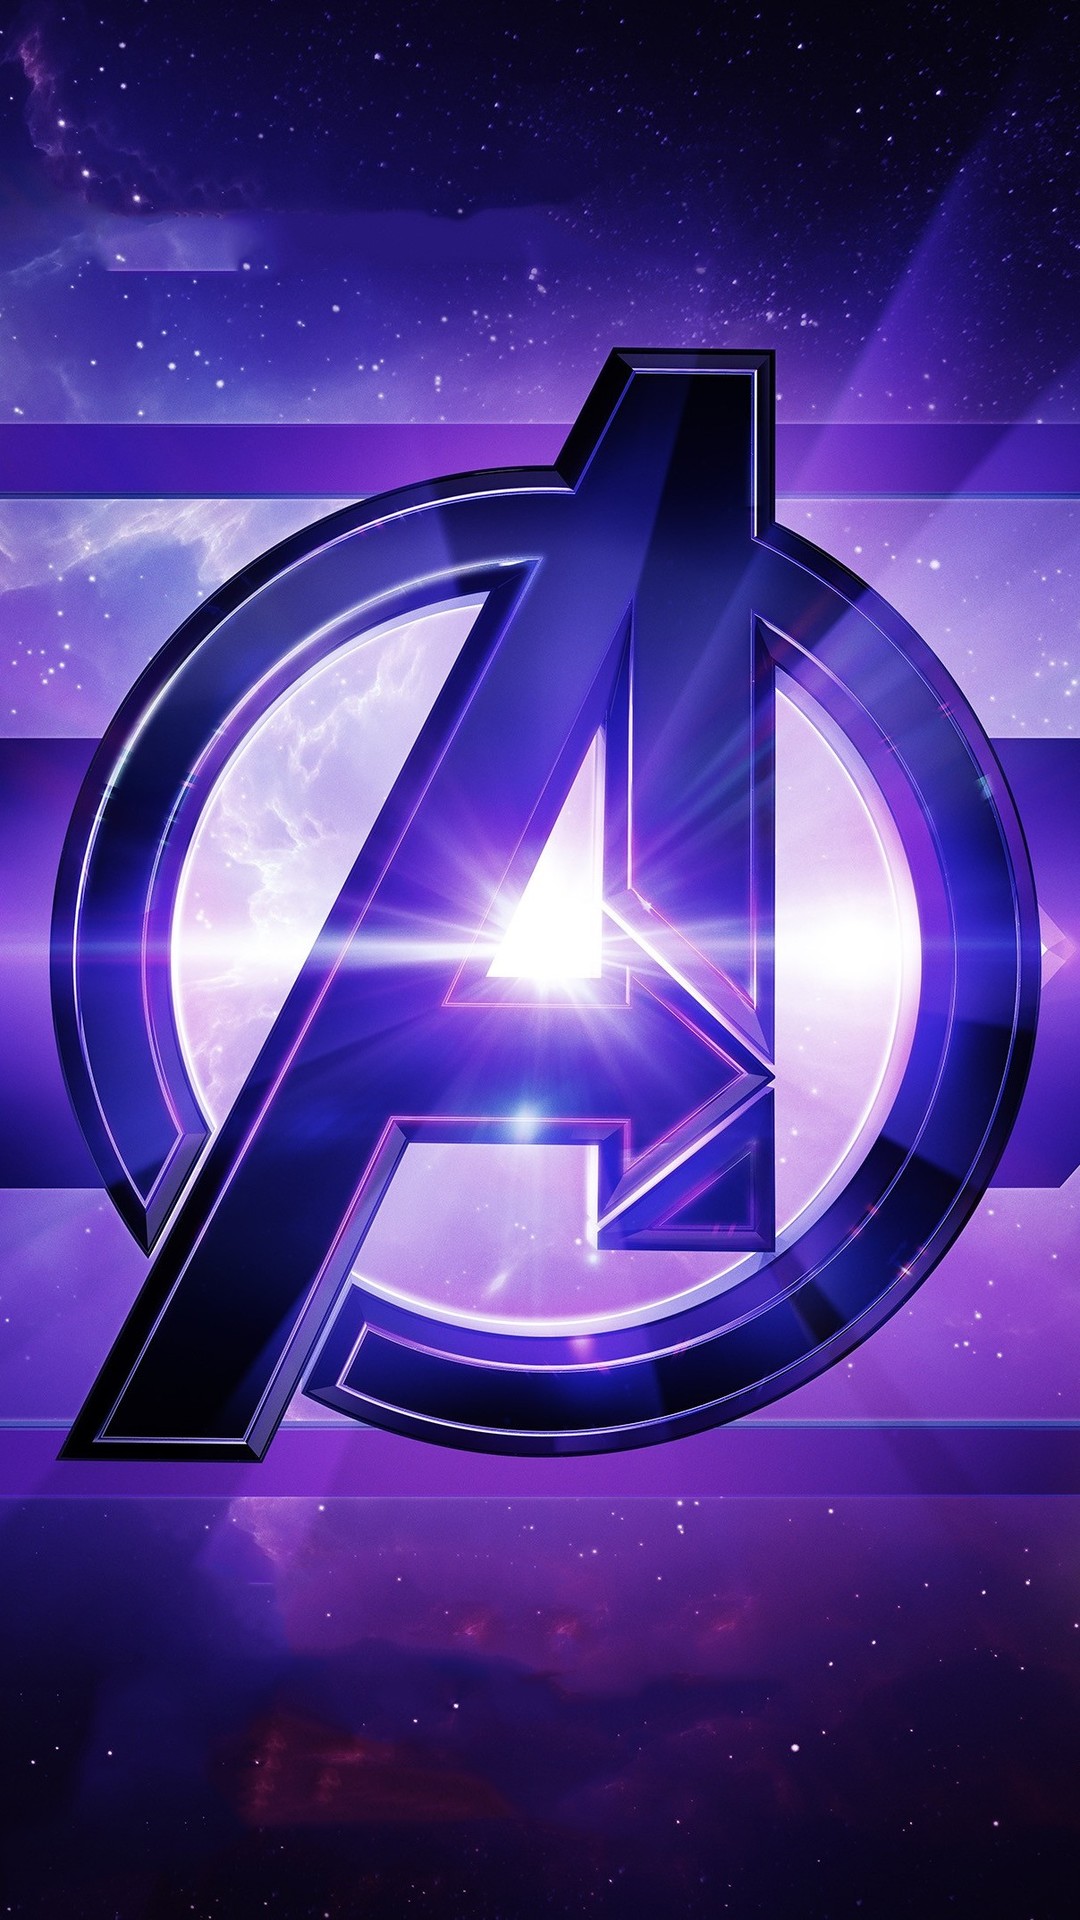 1080x1920 avengers endgame, 2019 movies, movies, hd, logo for iPhone 8 wallpaper